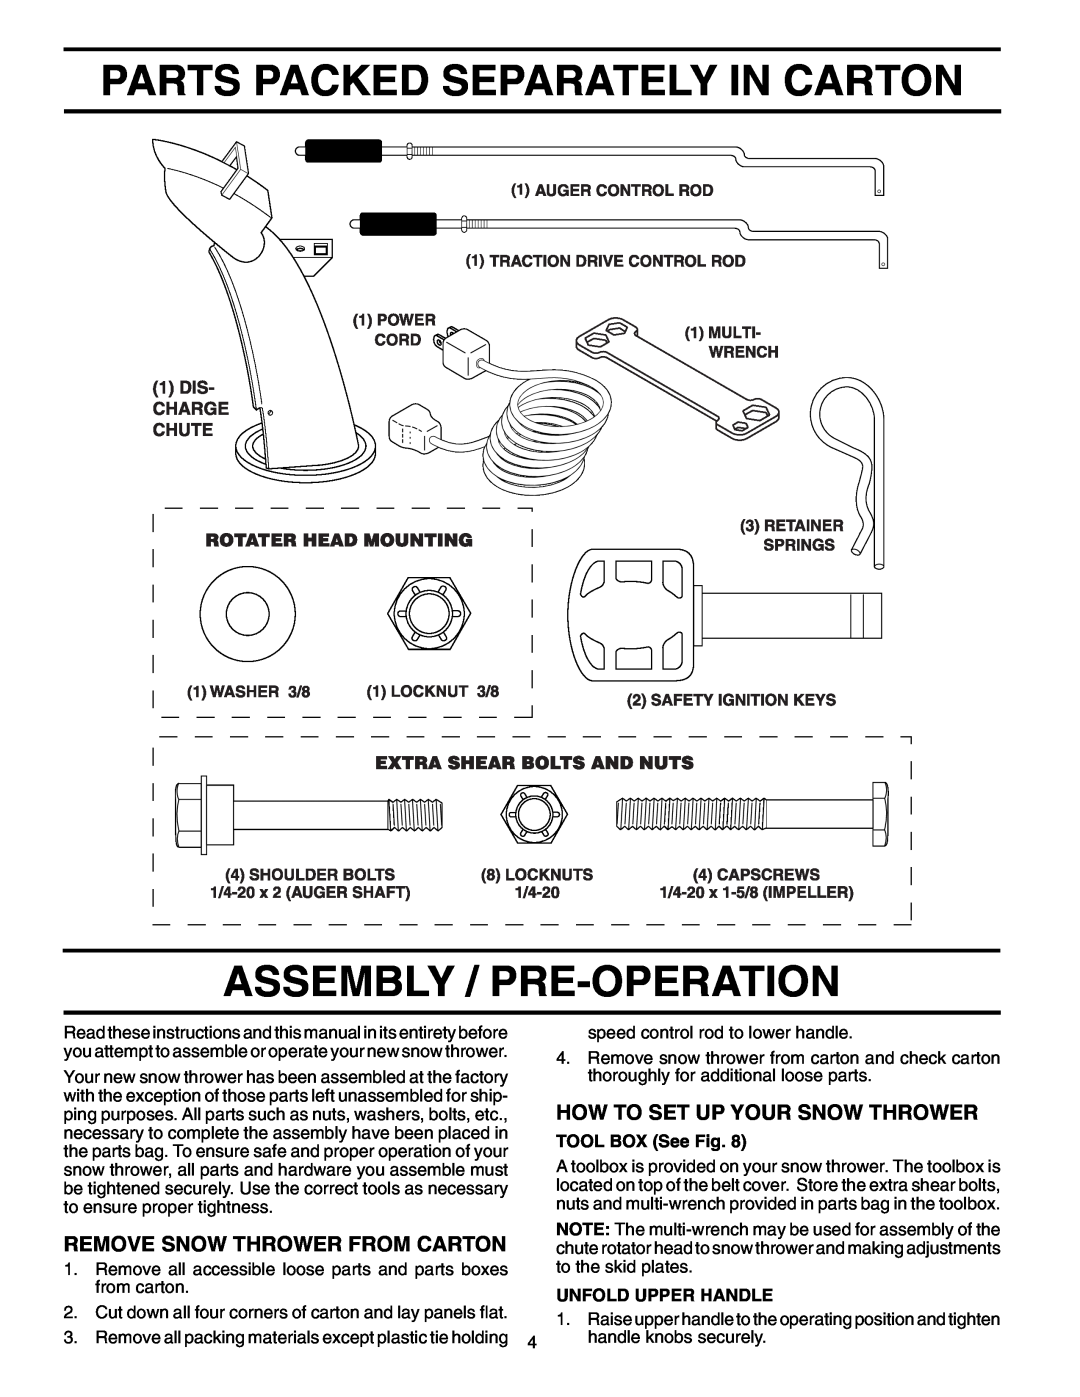 Poulan PP7527ES owner manual Parts Packed Separately In Carton, Assembly / Pre-Operation, How To Set Up Your Snow Thrower 